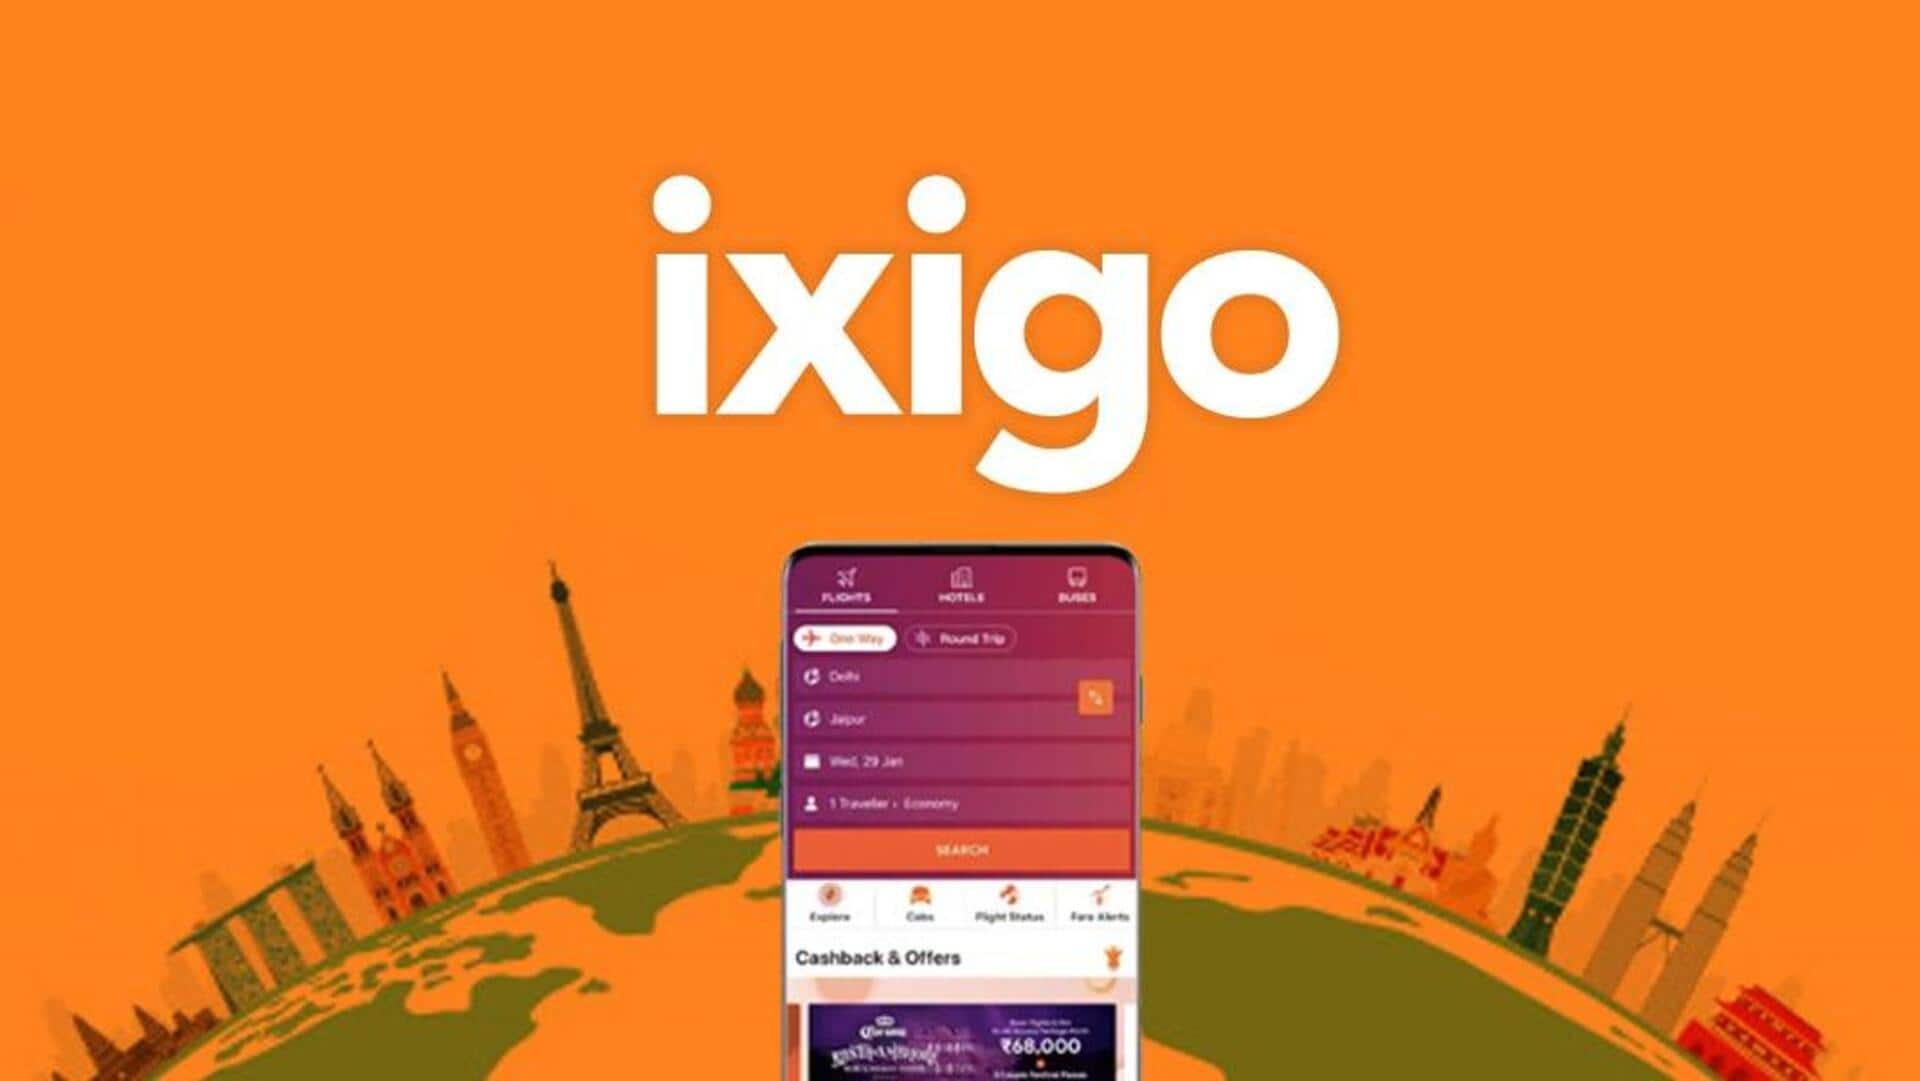 Morgan Stanley-backed Ixigo's IPO opens for subscription: Should you invest?